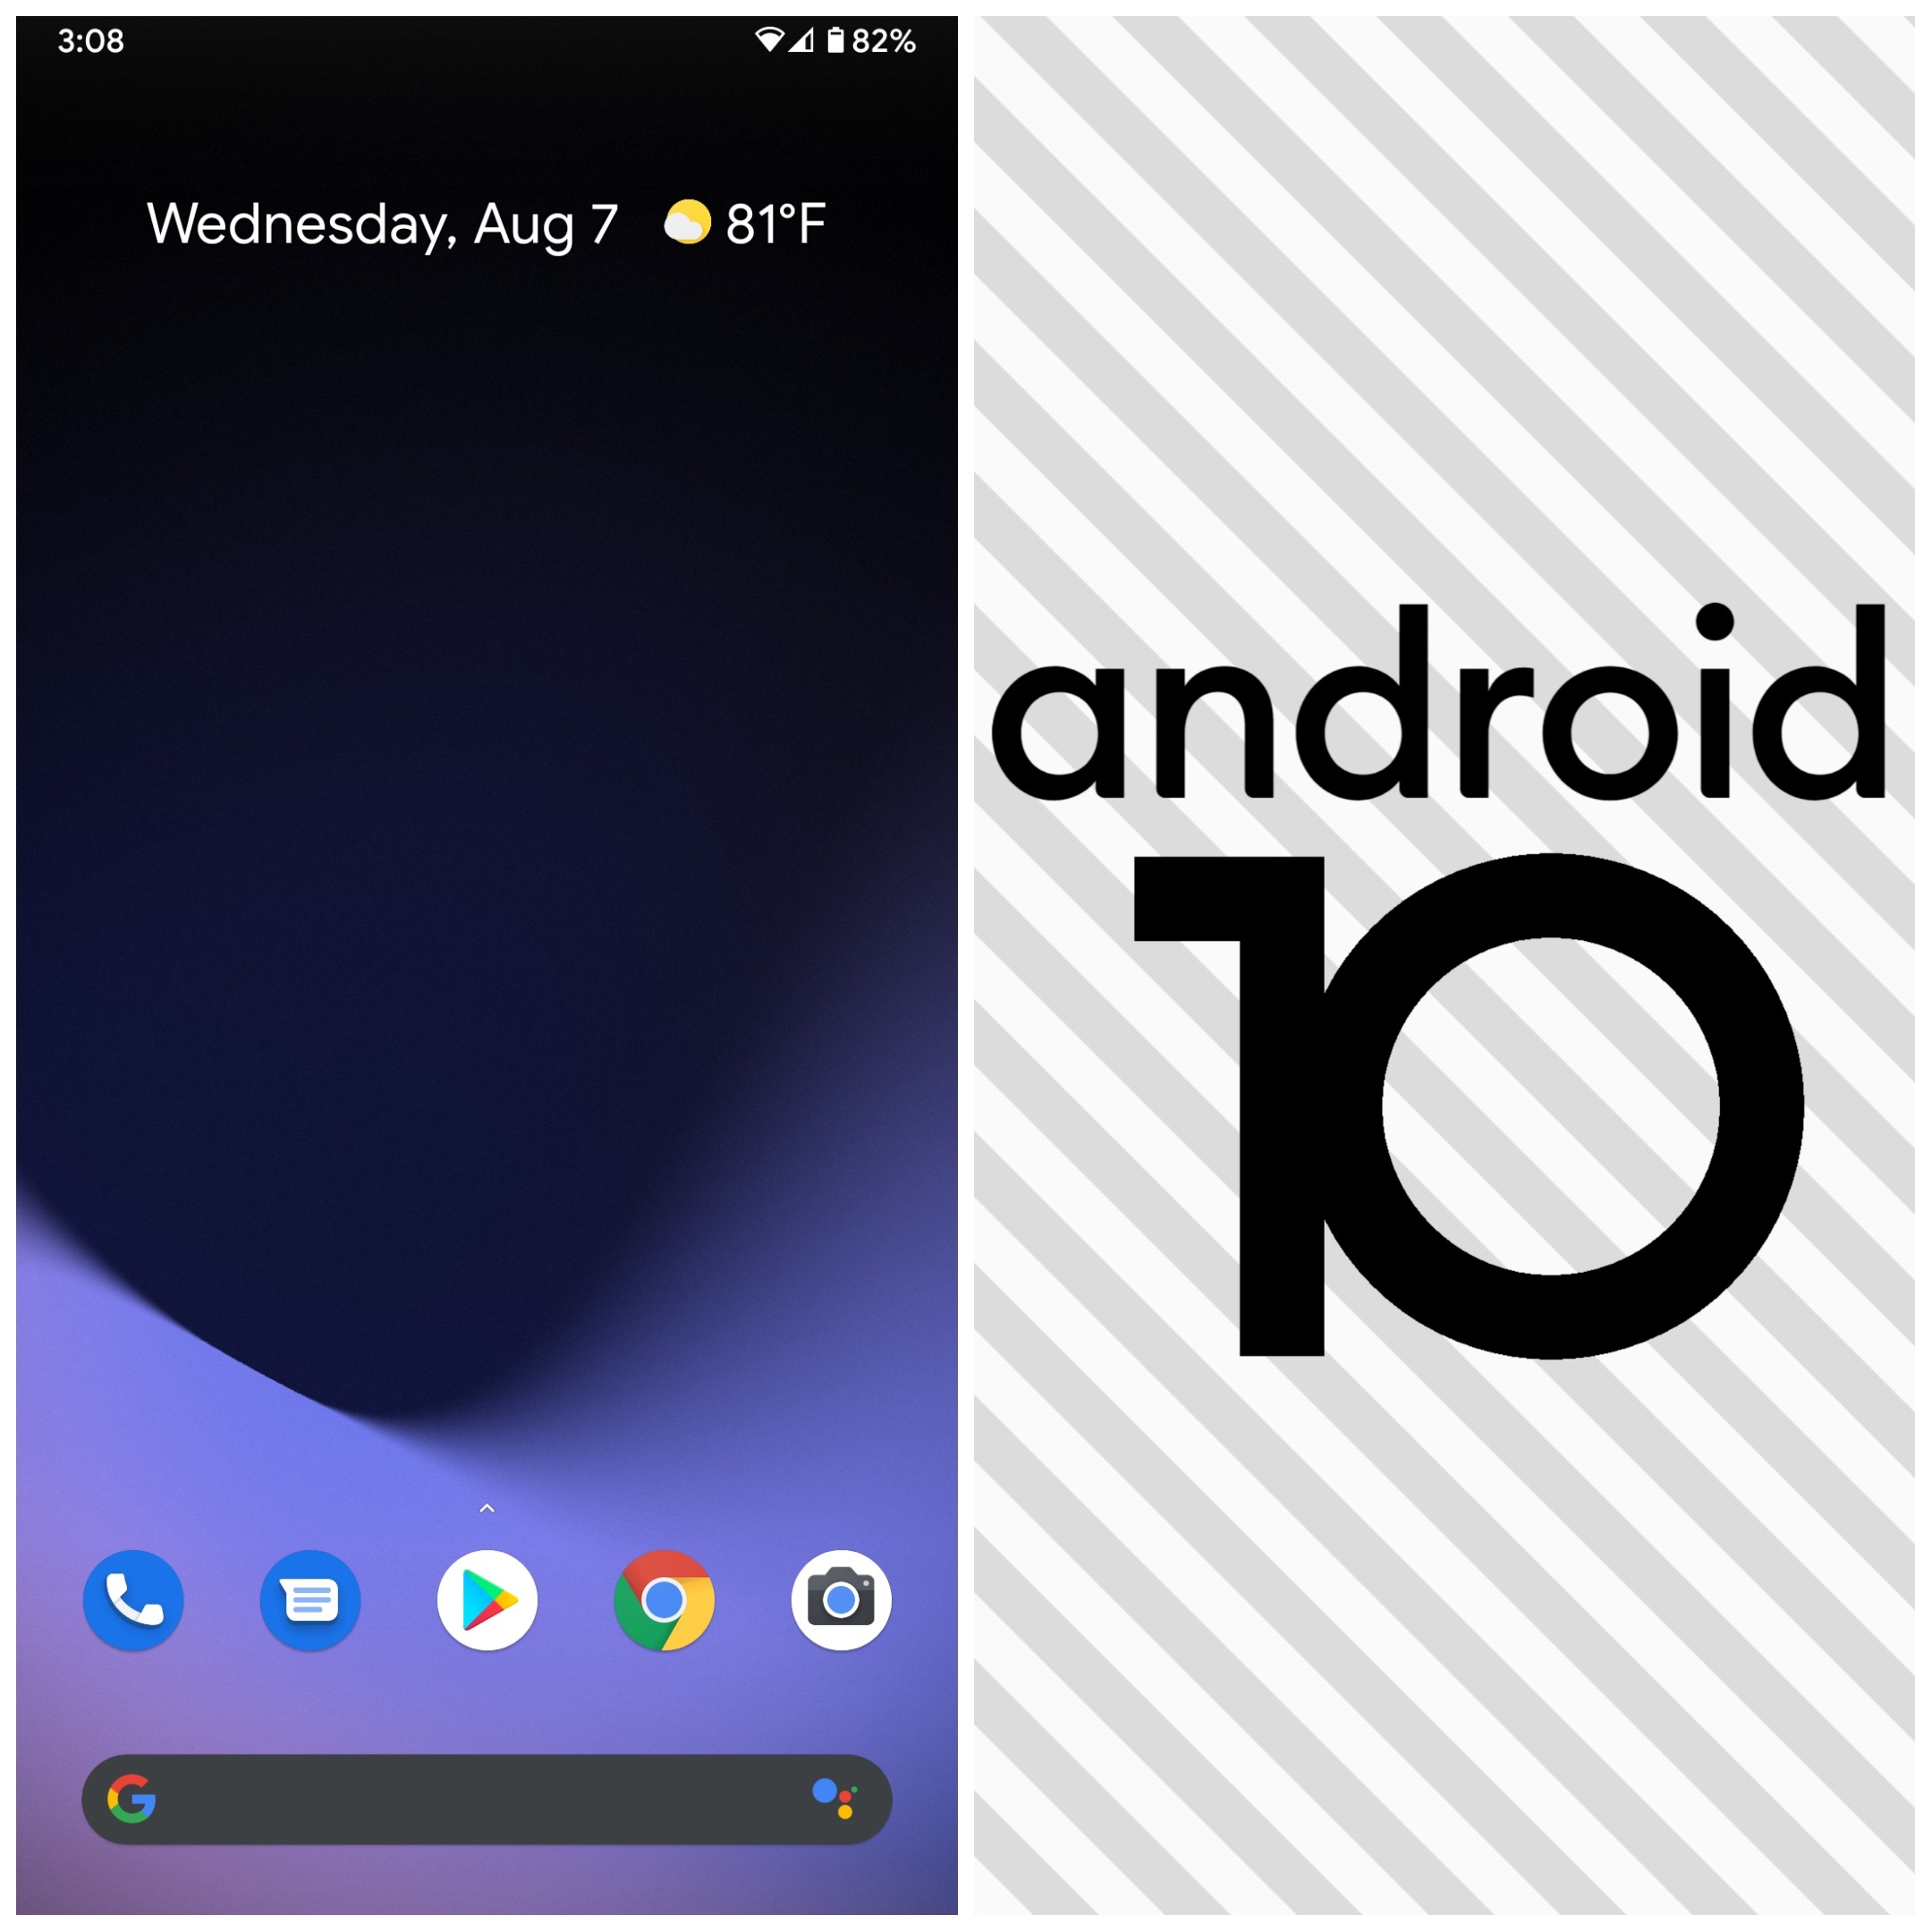 The history of Android 10